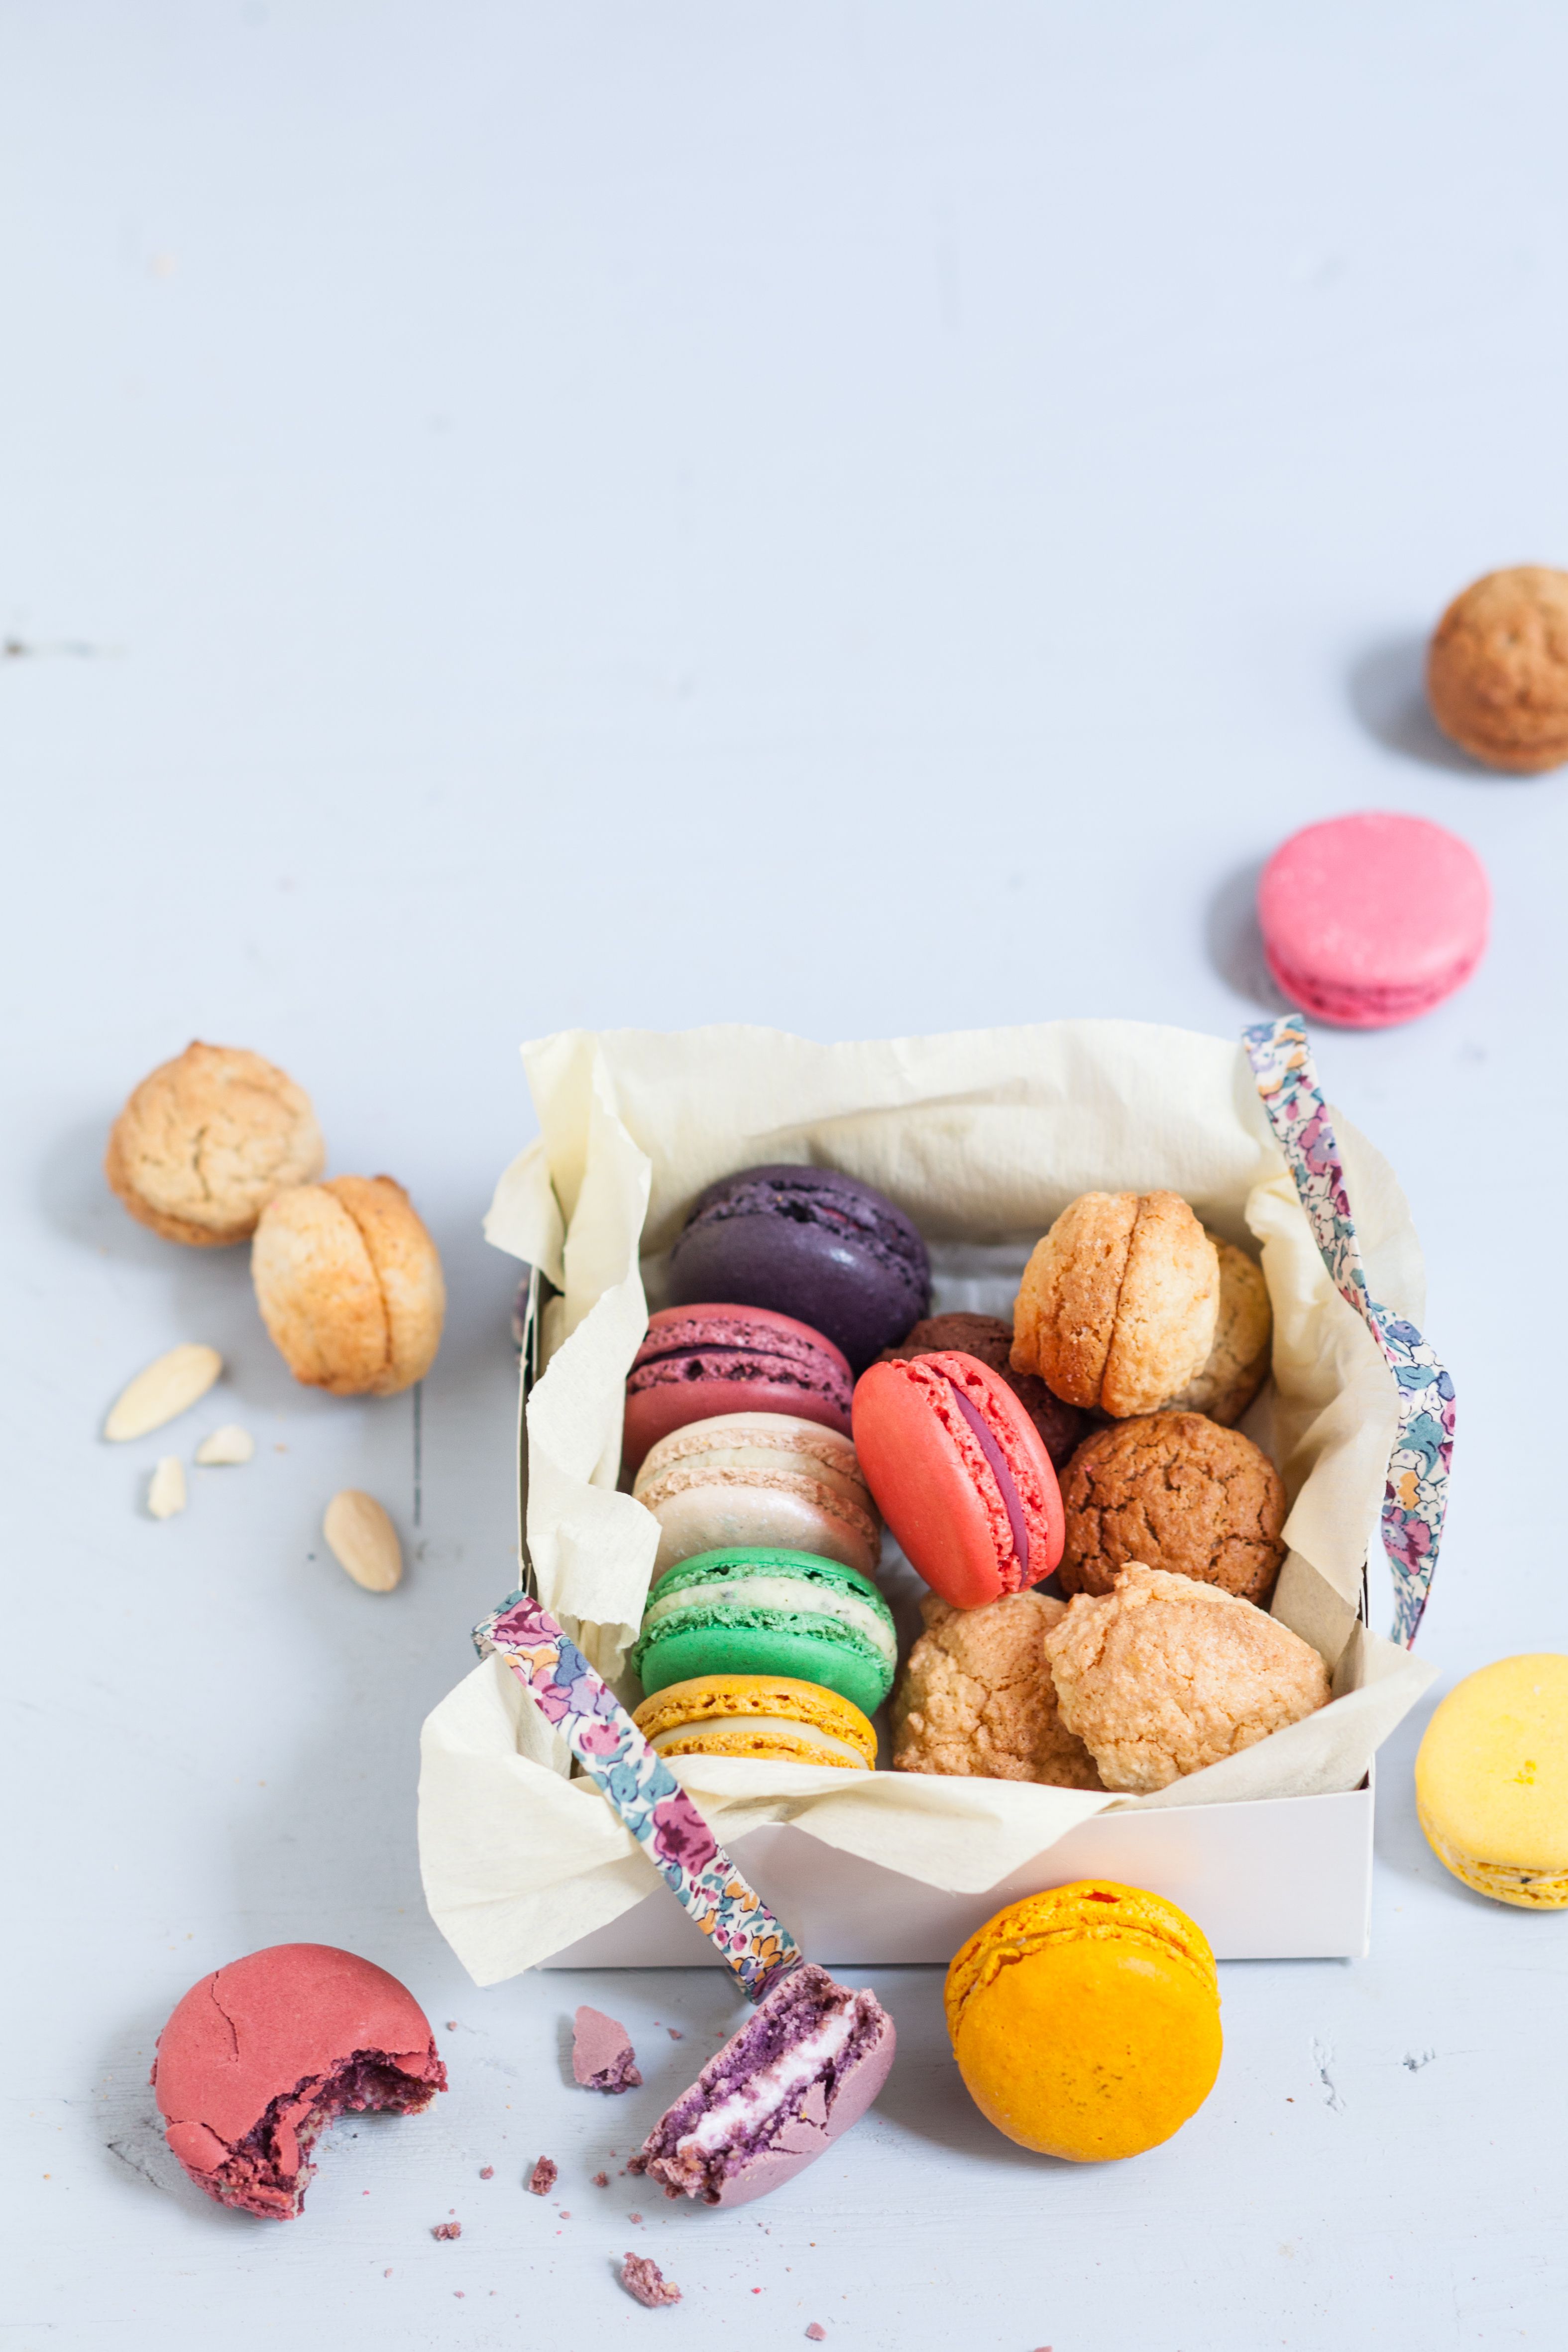 Food photography and styling : Macarons by Le Parisien magazine ...